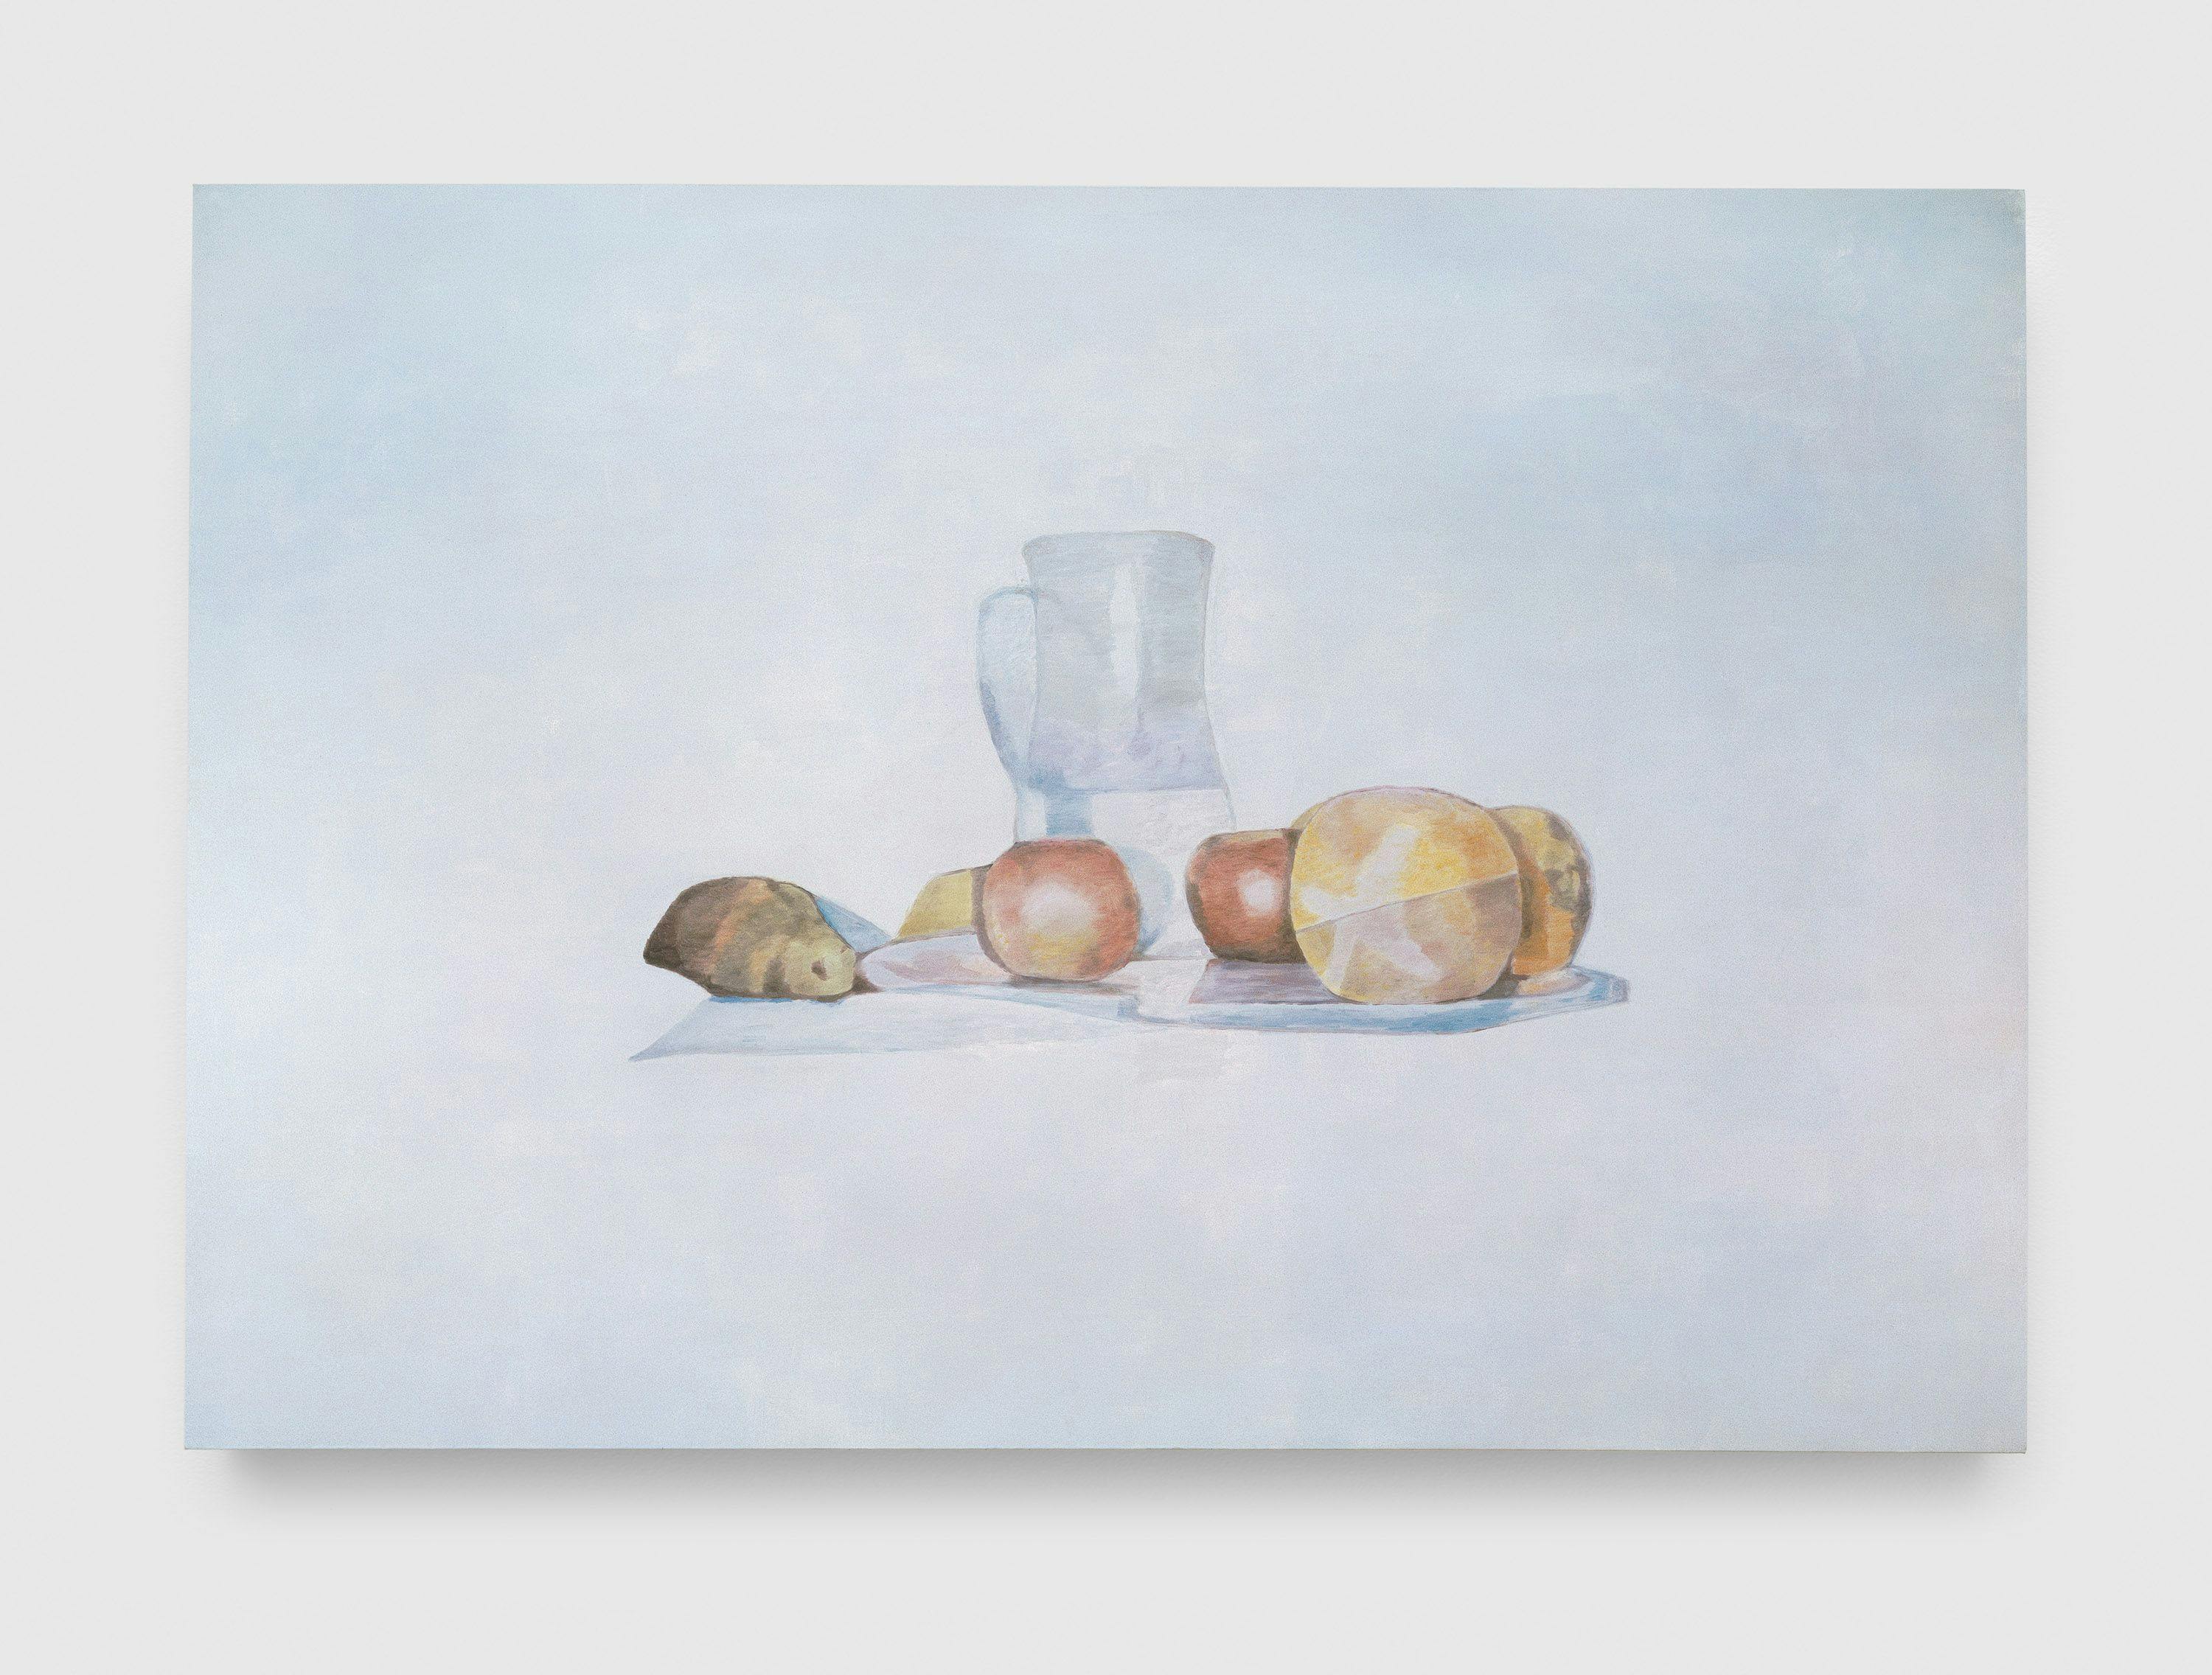 A painting by Luc Tuymans, titled Still Life, dated 2002.